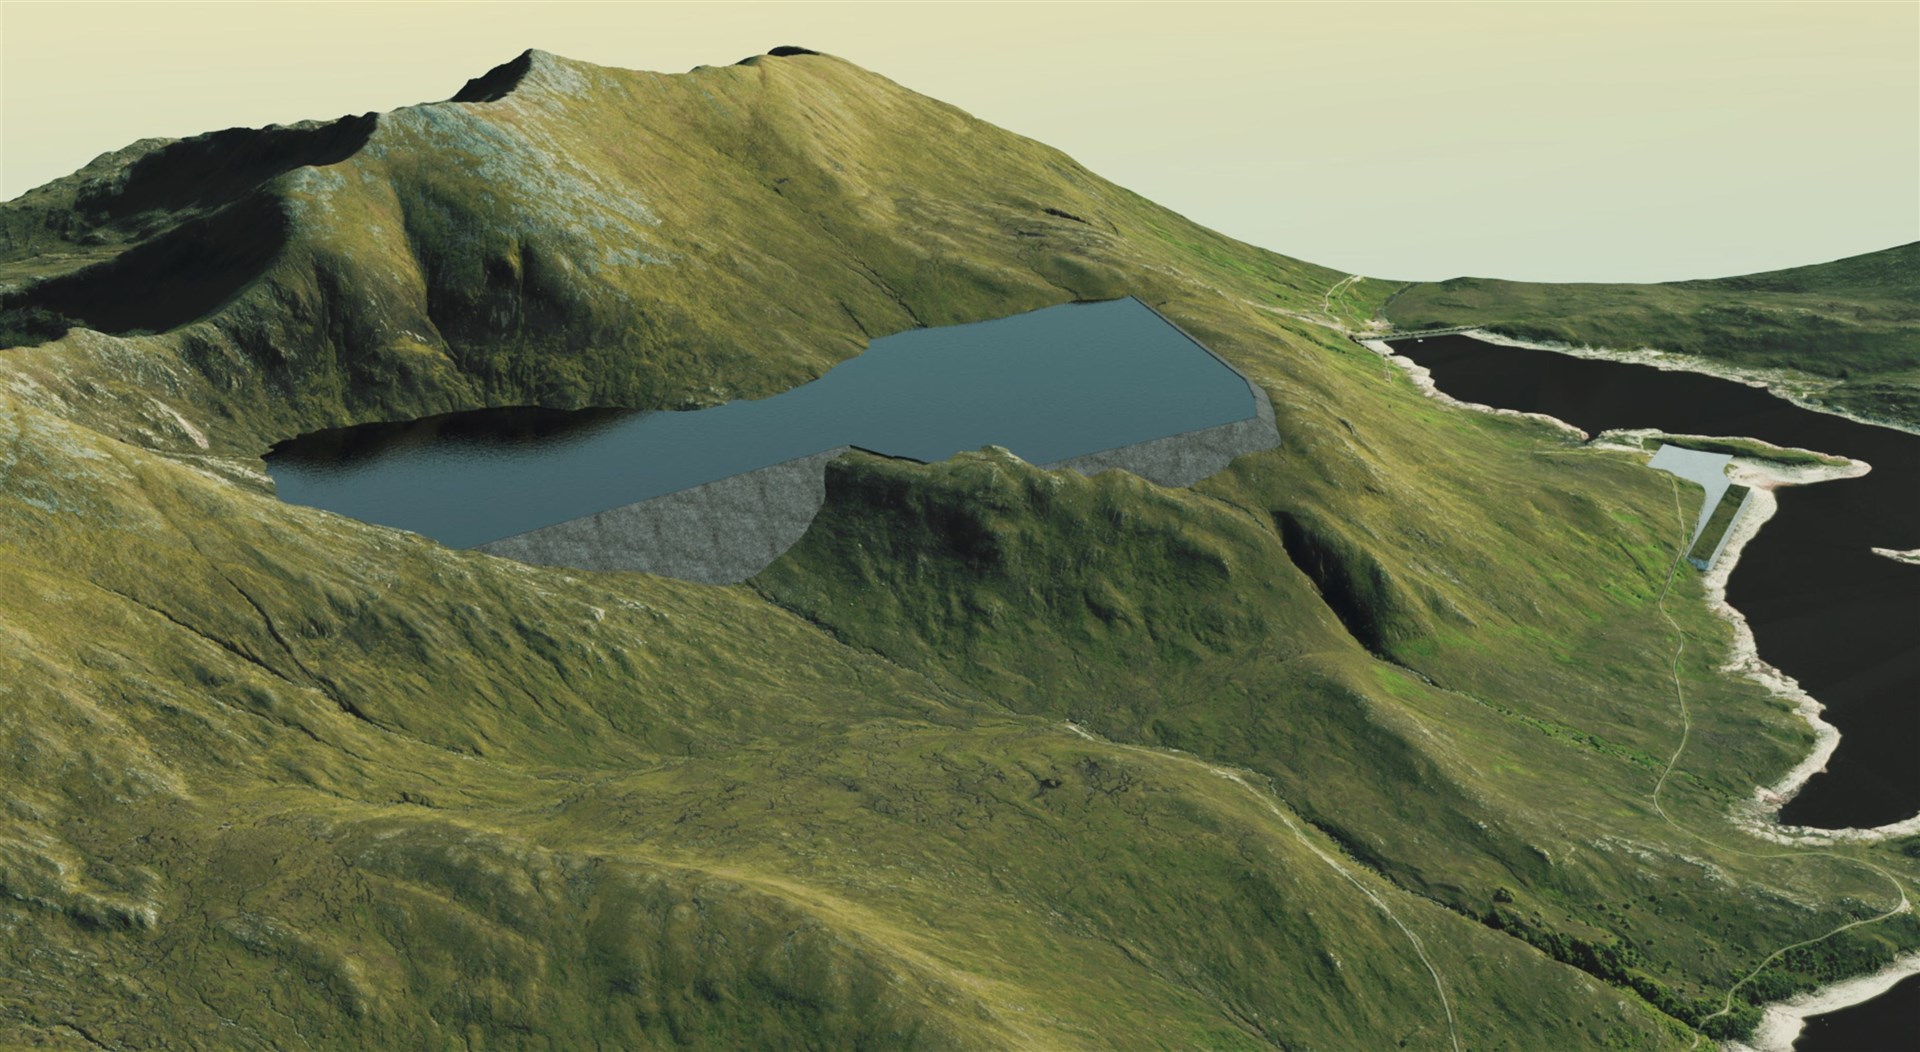 The proposed new dams and upper reservoir (left) with Loch Quoich on the right.